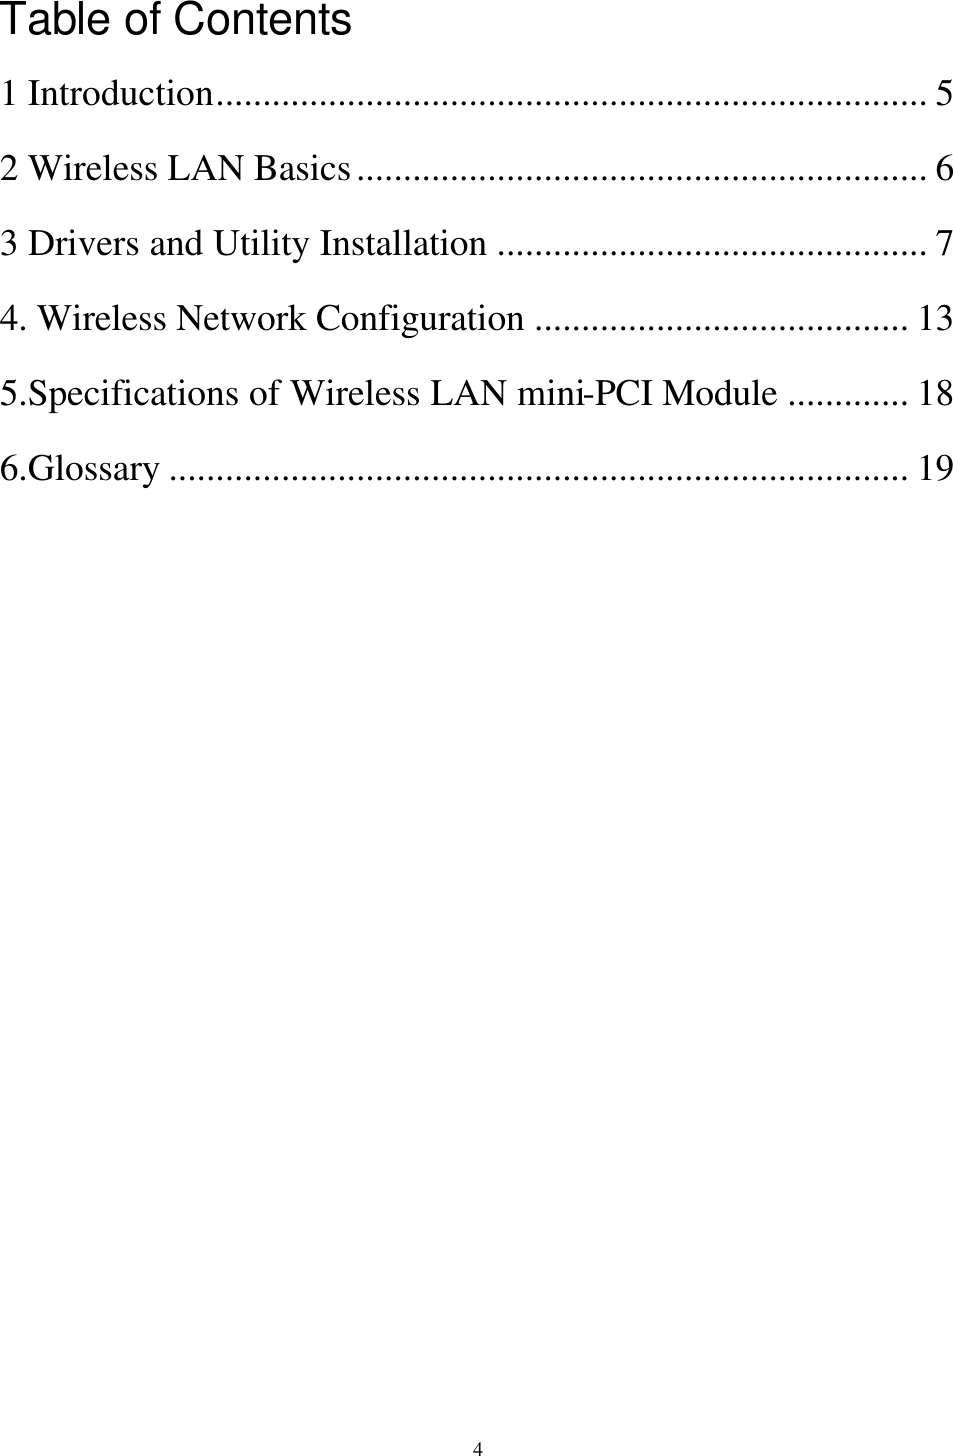  4 Table of Contents 1 Introduction............................................................................ 5 2 Wireless LAN Basics............................................................. 6 3 Drivers and Utility Installation .............................................. 7 4. Wireless Network Configuration ........................................ 13 5.Specifications of Wireless LAN mini-PCI Module ............. 18 6.Glossary ............................................................................... 19    